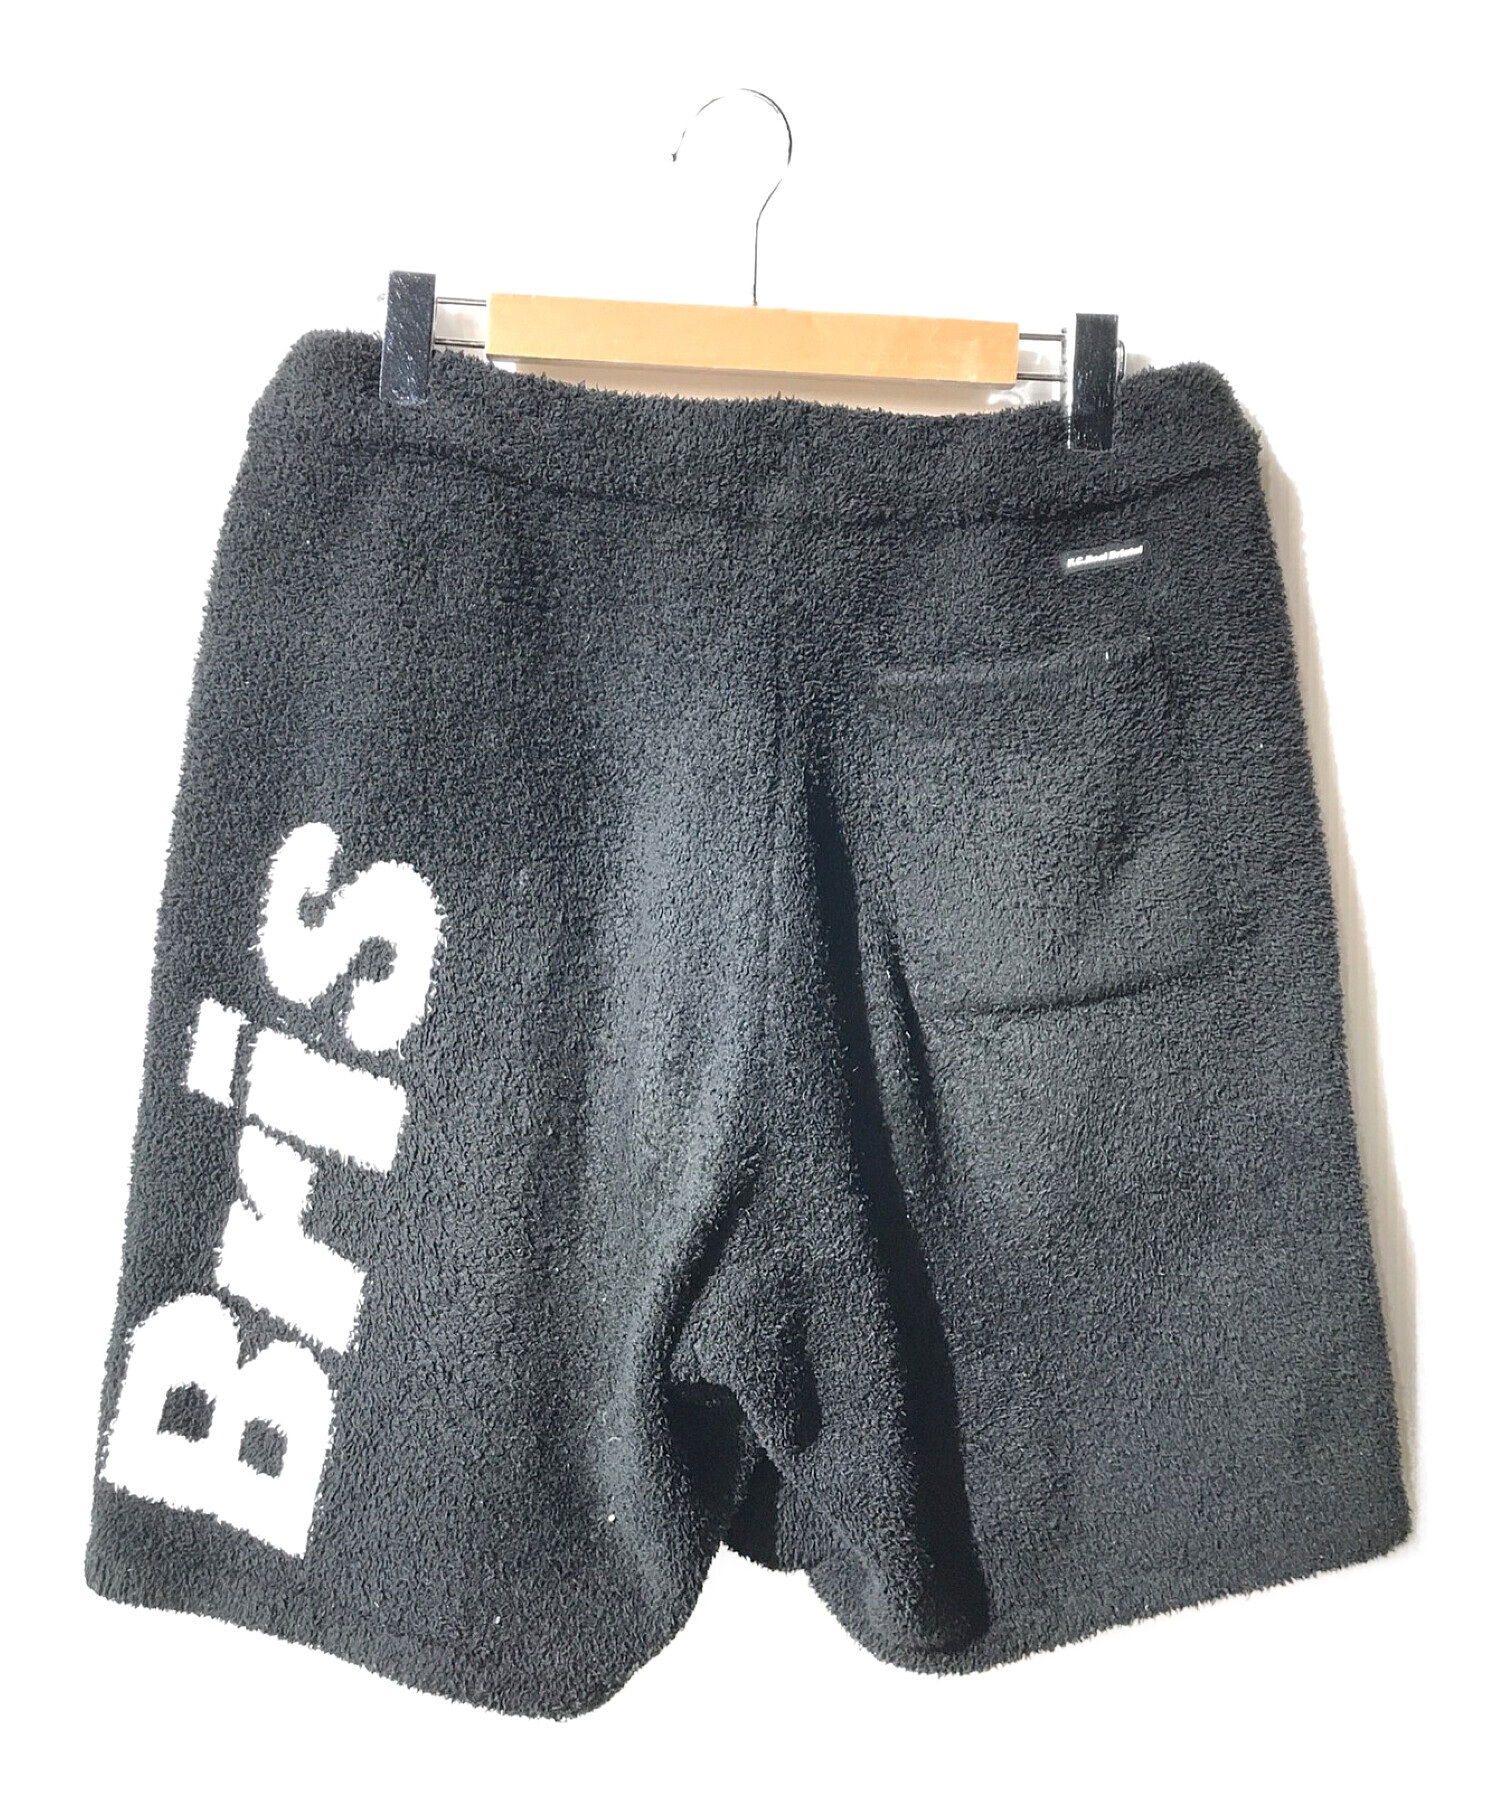 FCRB BAREFOOT DREAMS PILE SHORTS新品未使用品